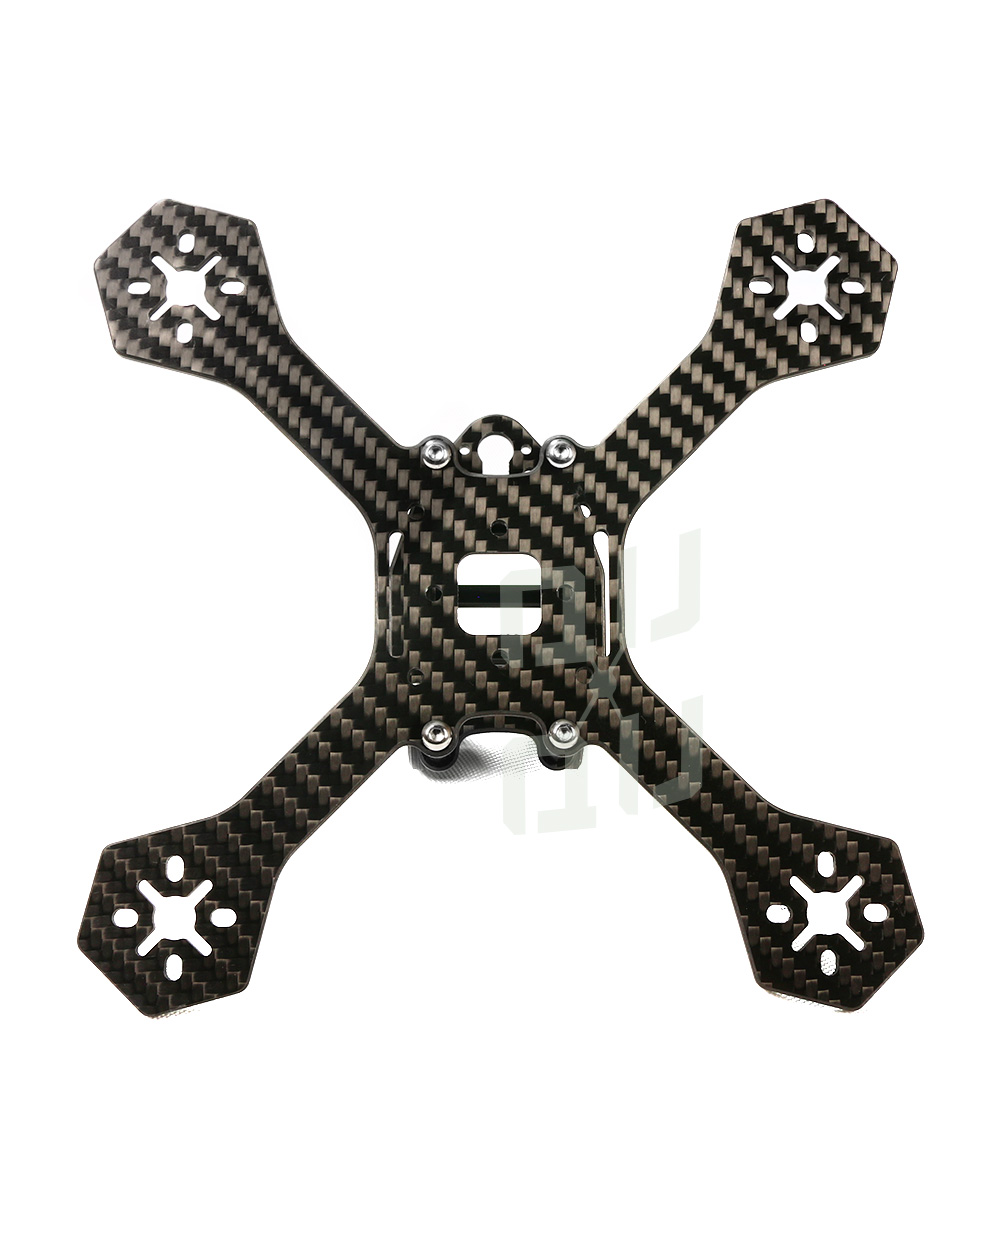 QQ166 4" Racing Drone X-style frame available from QuadQuestions.com bottom view